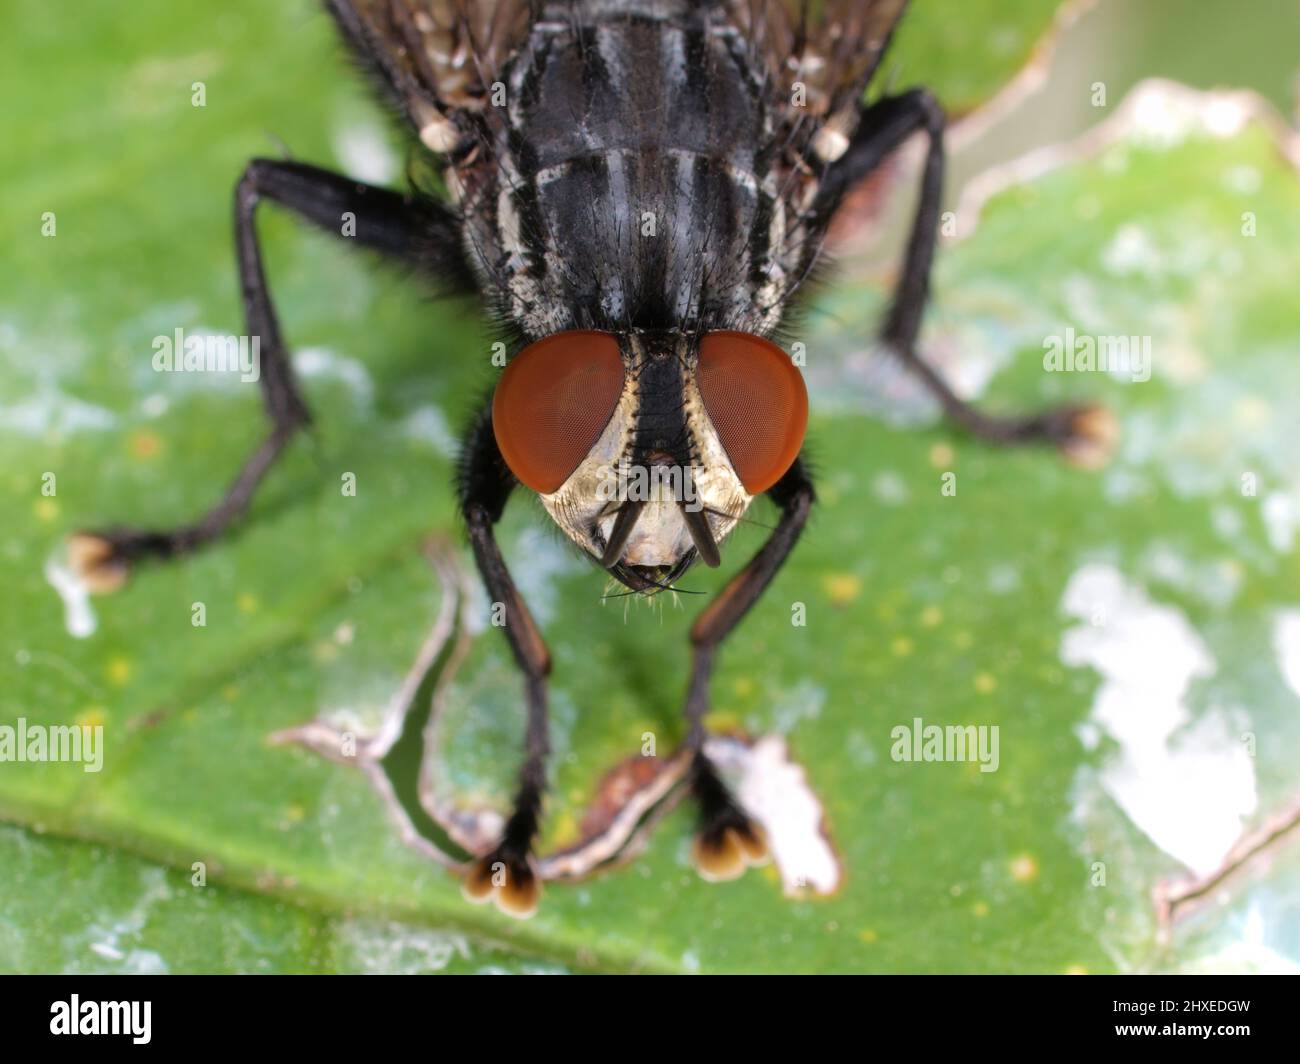 Portrait of a male flesh fly (Sarcophaga species), with bright red compound eyes, overhead view Stock Photo